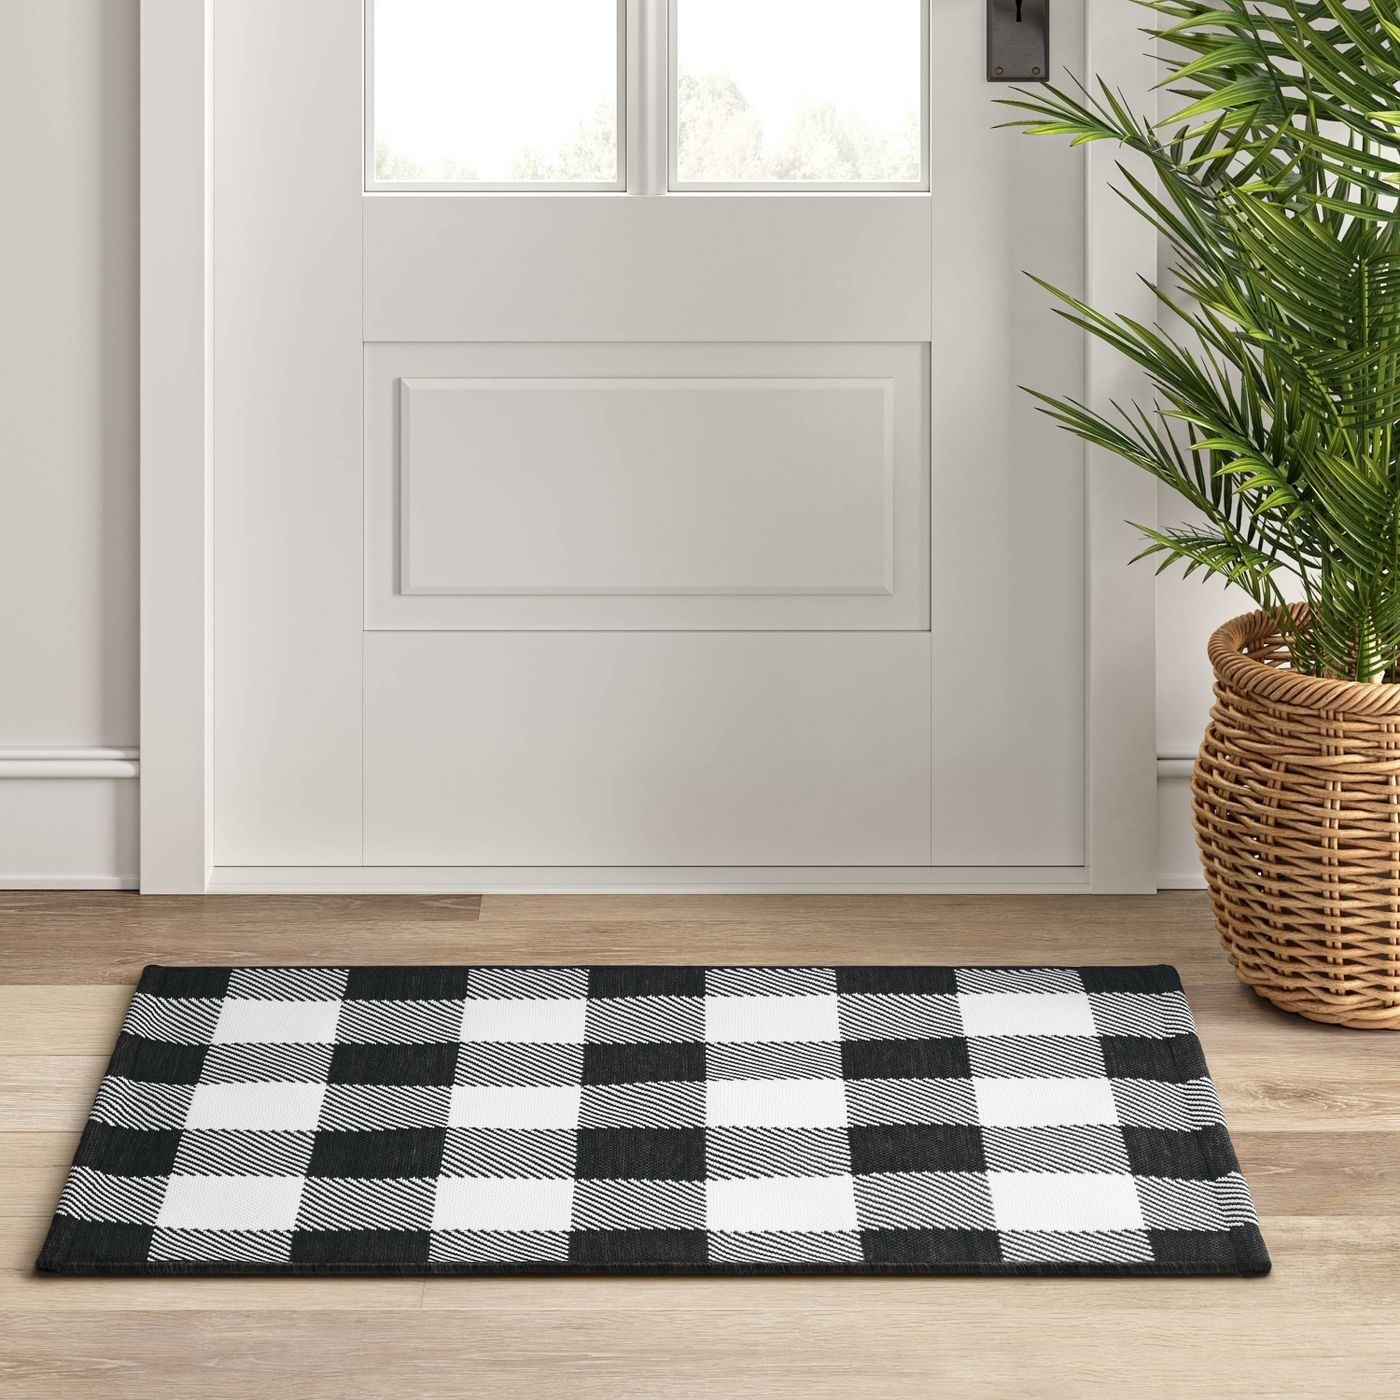 The rug, which is rectangular, with a buffalo check pattern in black and white